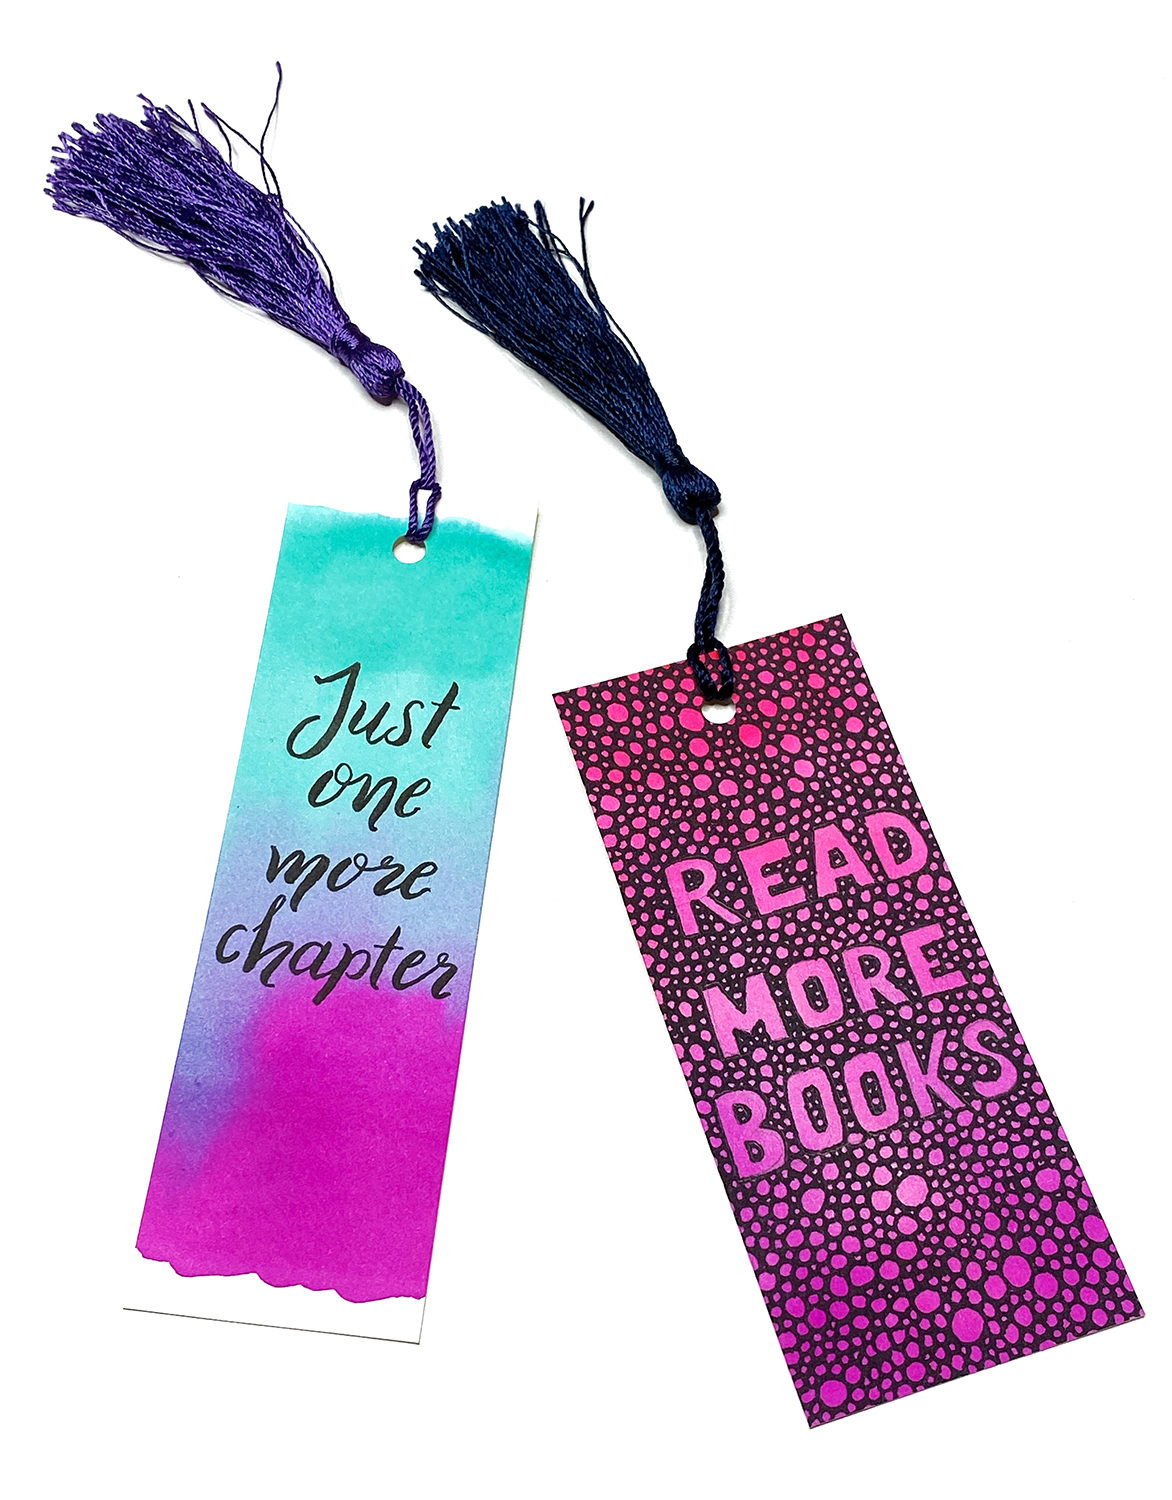 Bookmarks Using Tombow's Advanced Lettering Set by Jessica Mack on behalf of Tombow